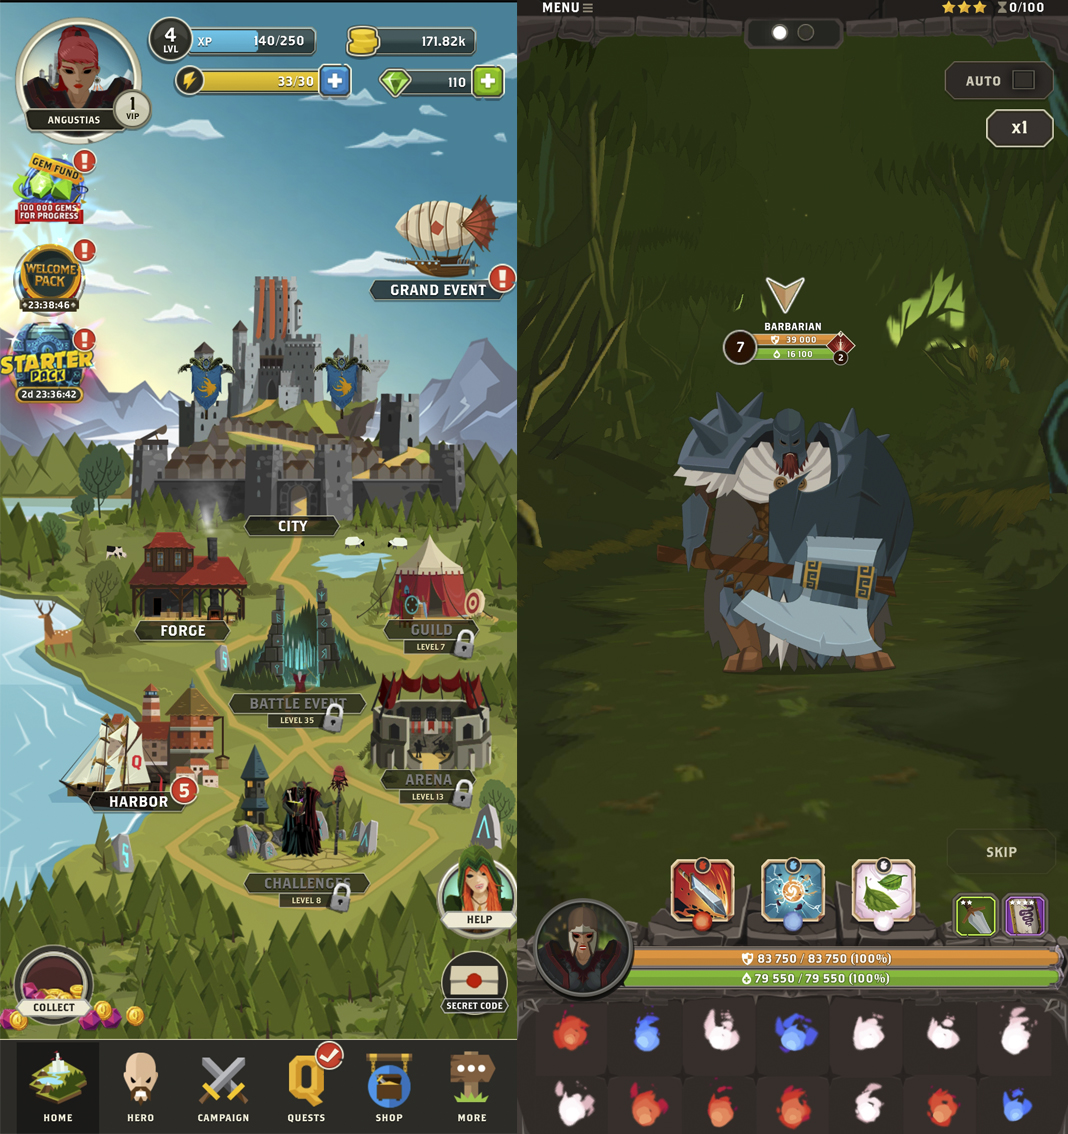 Questland: double screenshot showing the land on the left and a giant warrior on the right